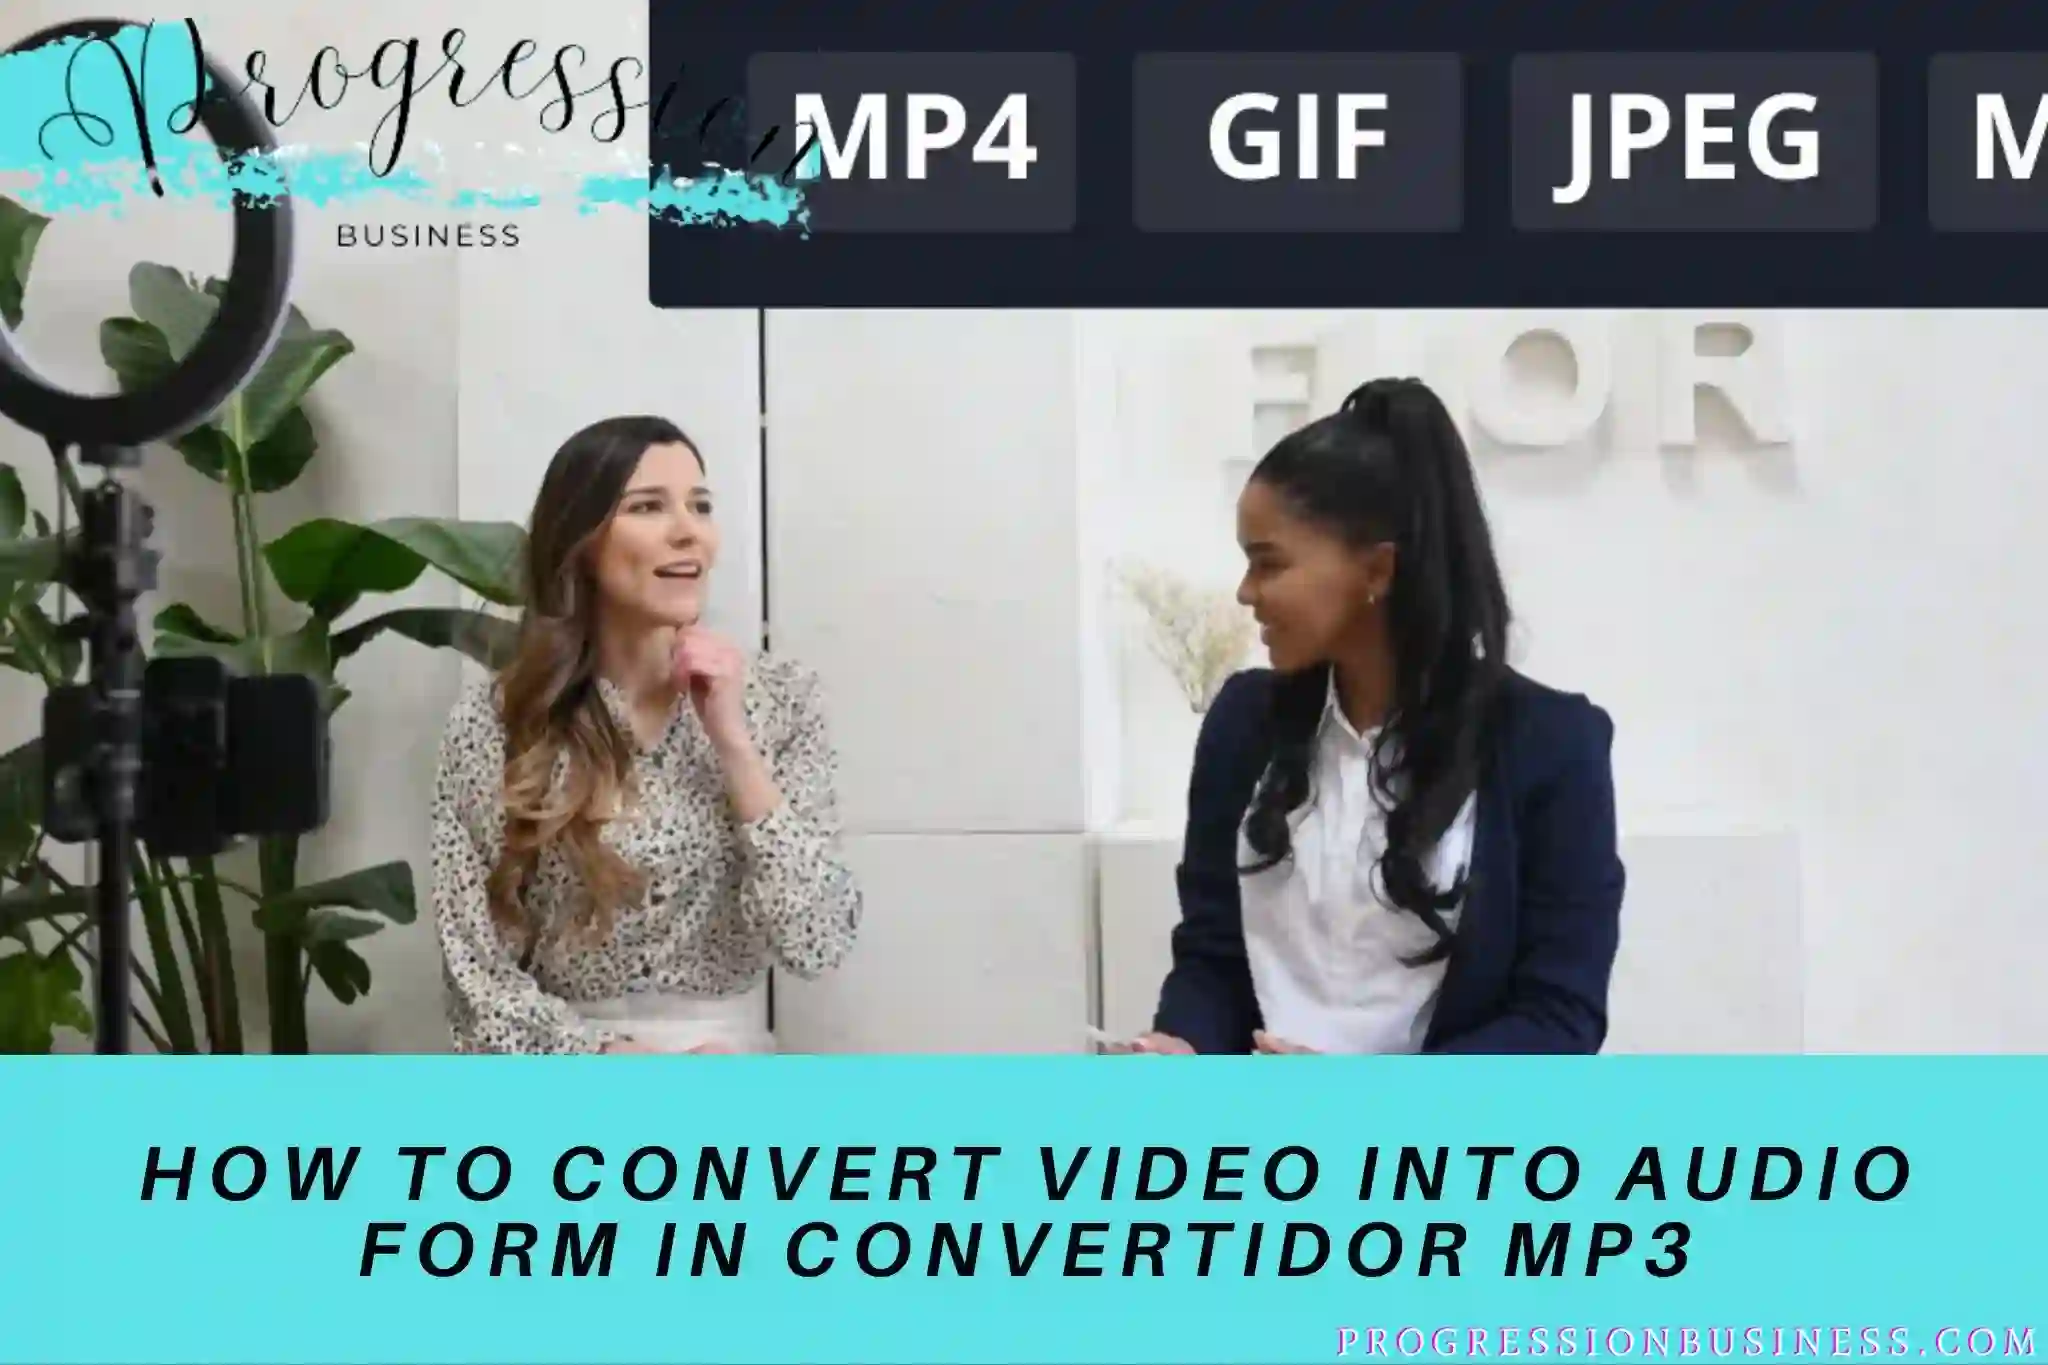 How To Convert Video Into Audio Form In Convertidor Mp3